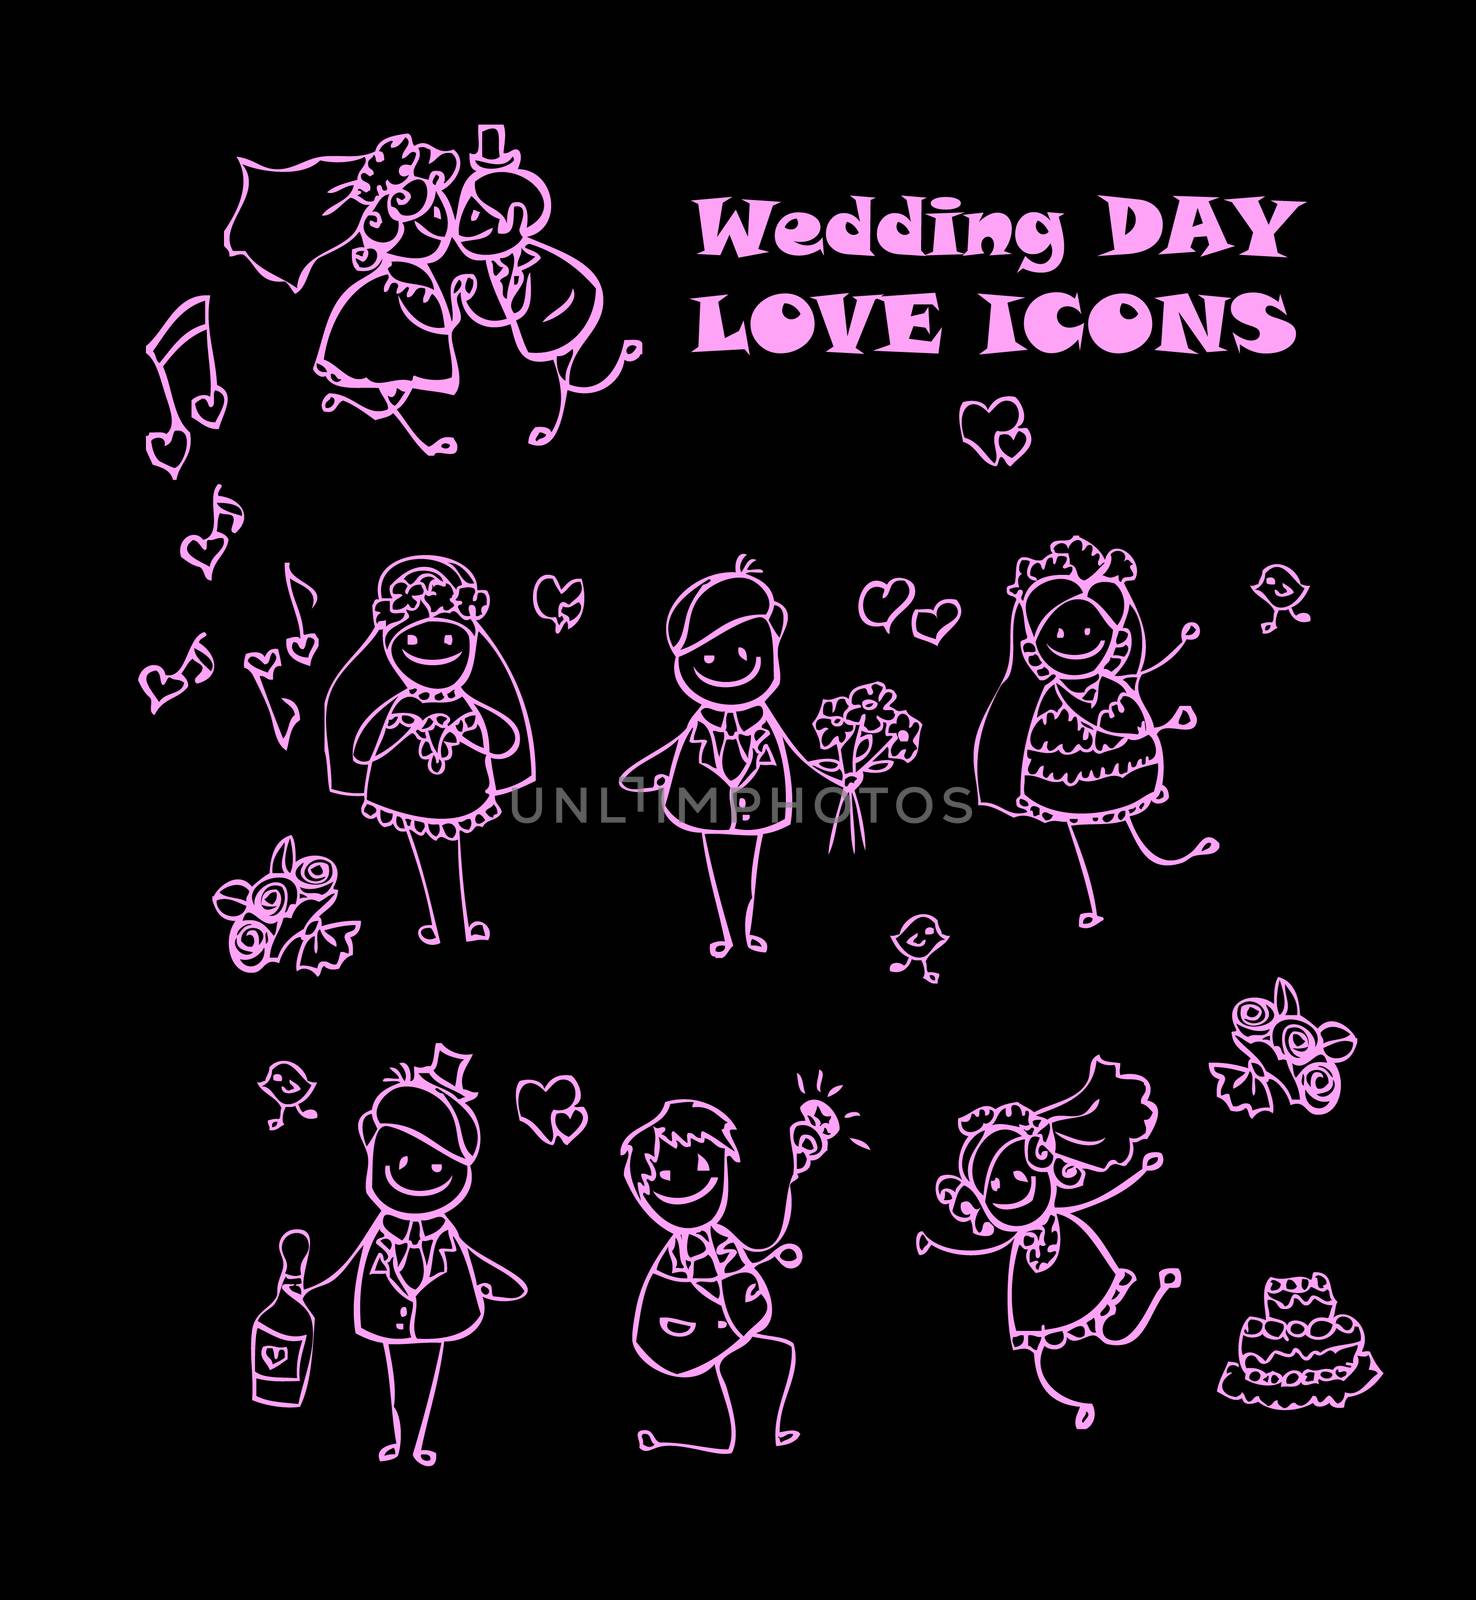 wedding love icons set, kids cartoon design, isolated wed people by IconsJewelry